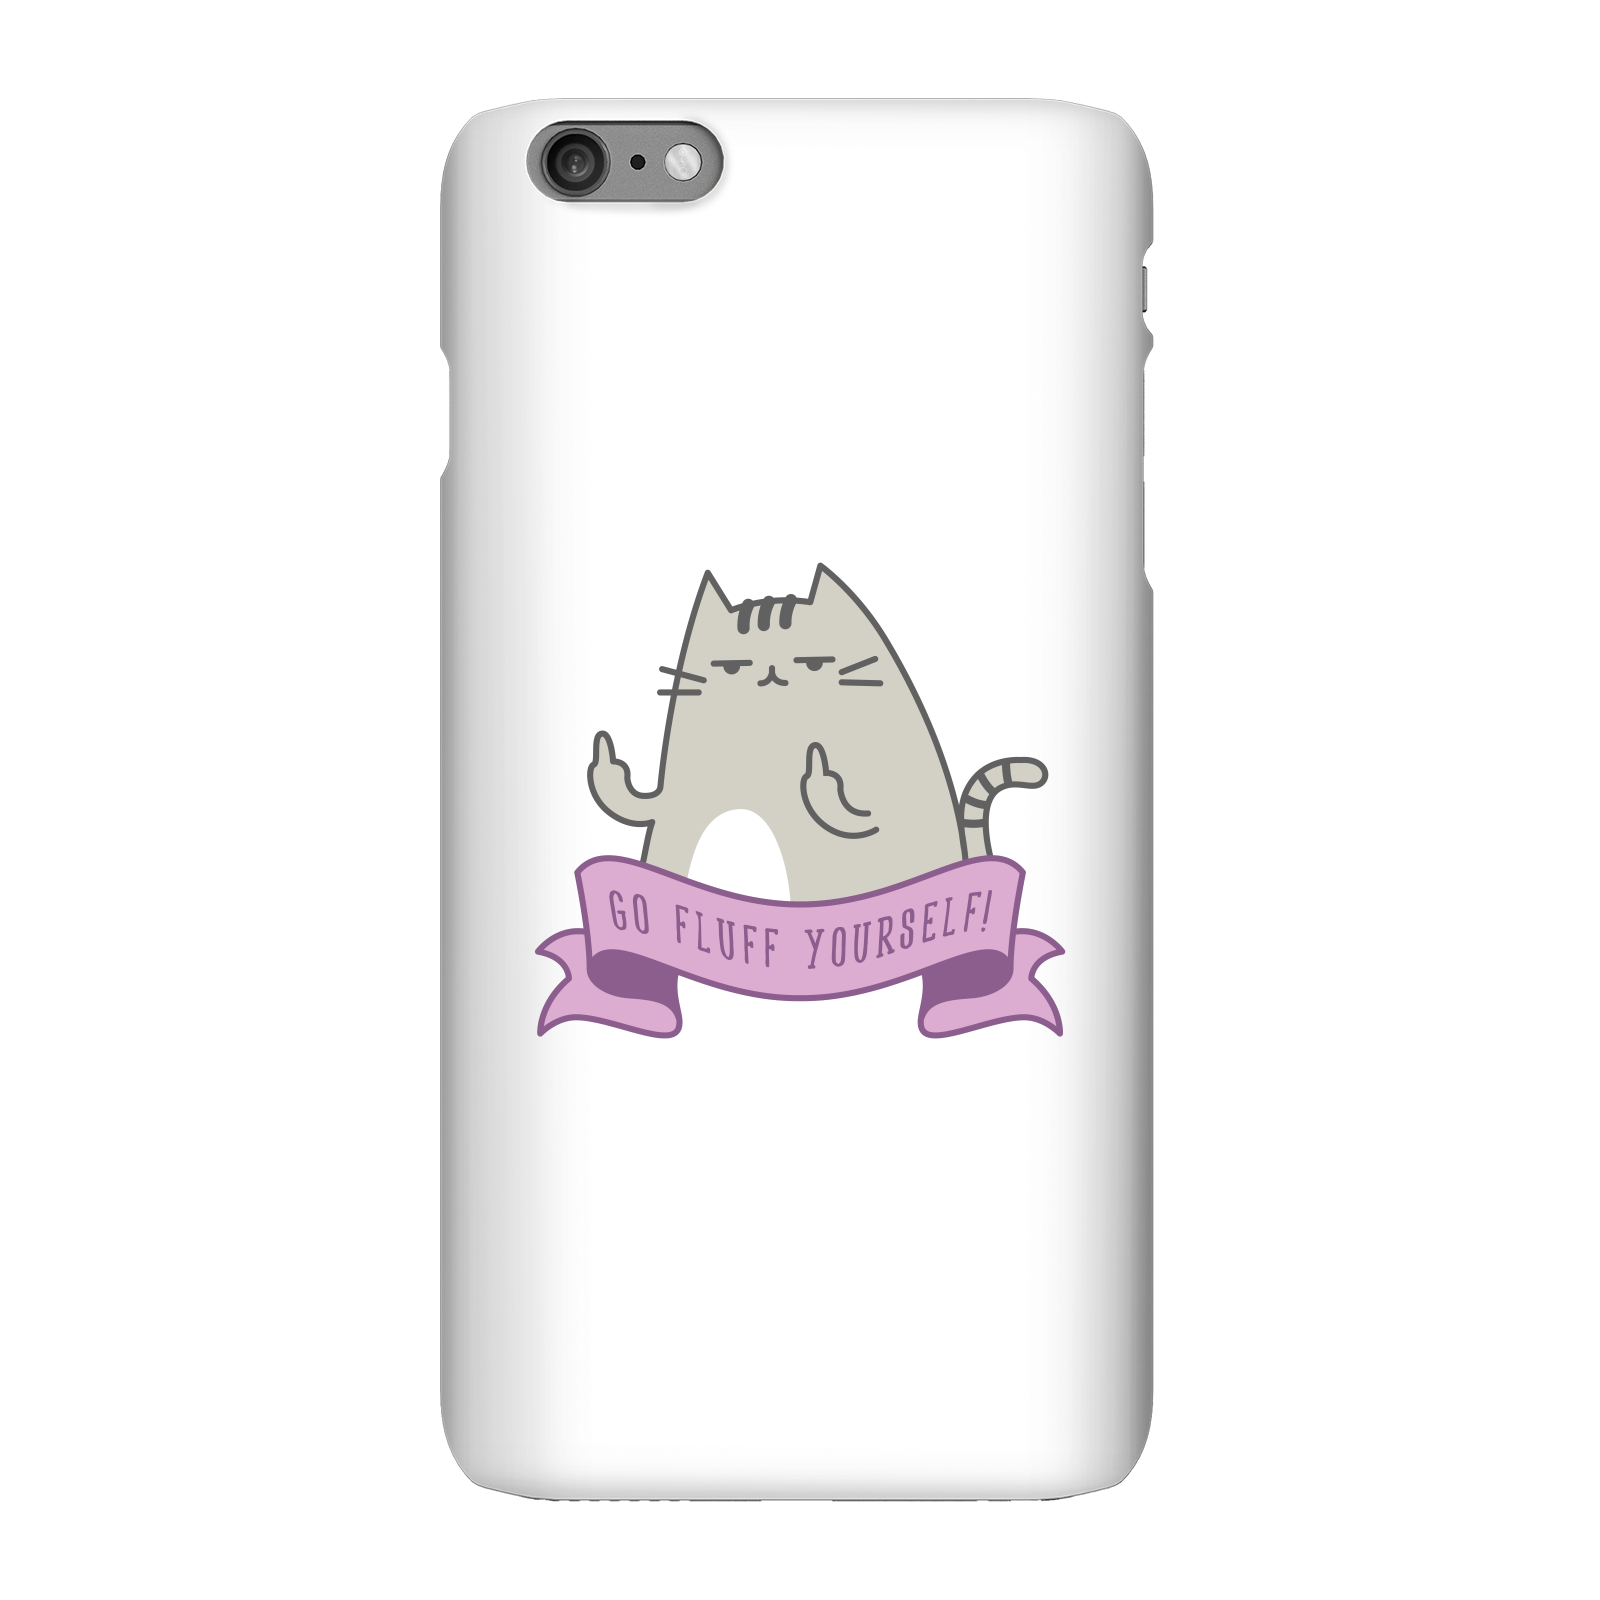 Go Fluff Yourself! Phone Case for iPhone and Android - iPhone 6 Plus - Snap Case - Matte